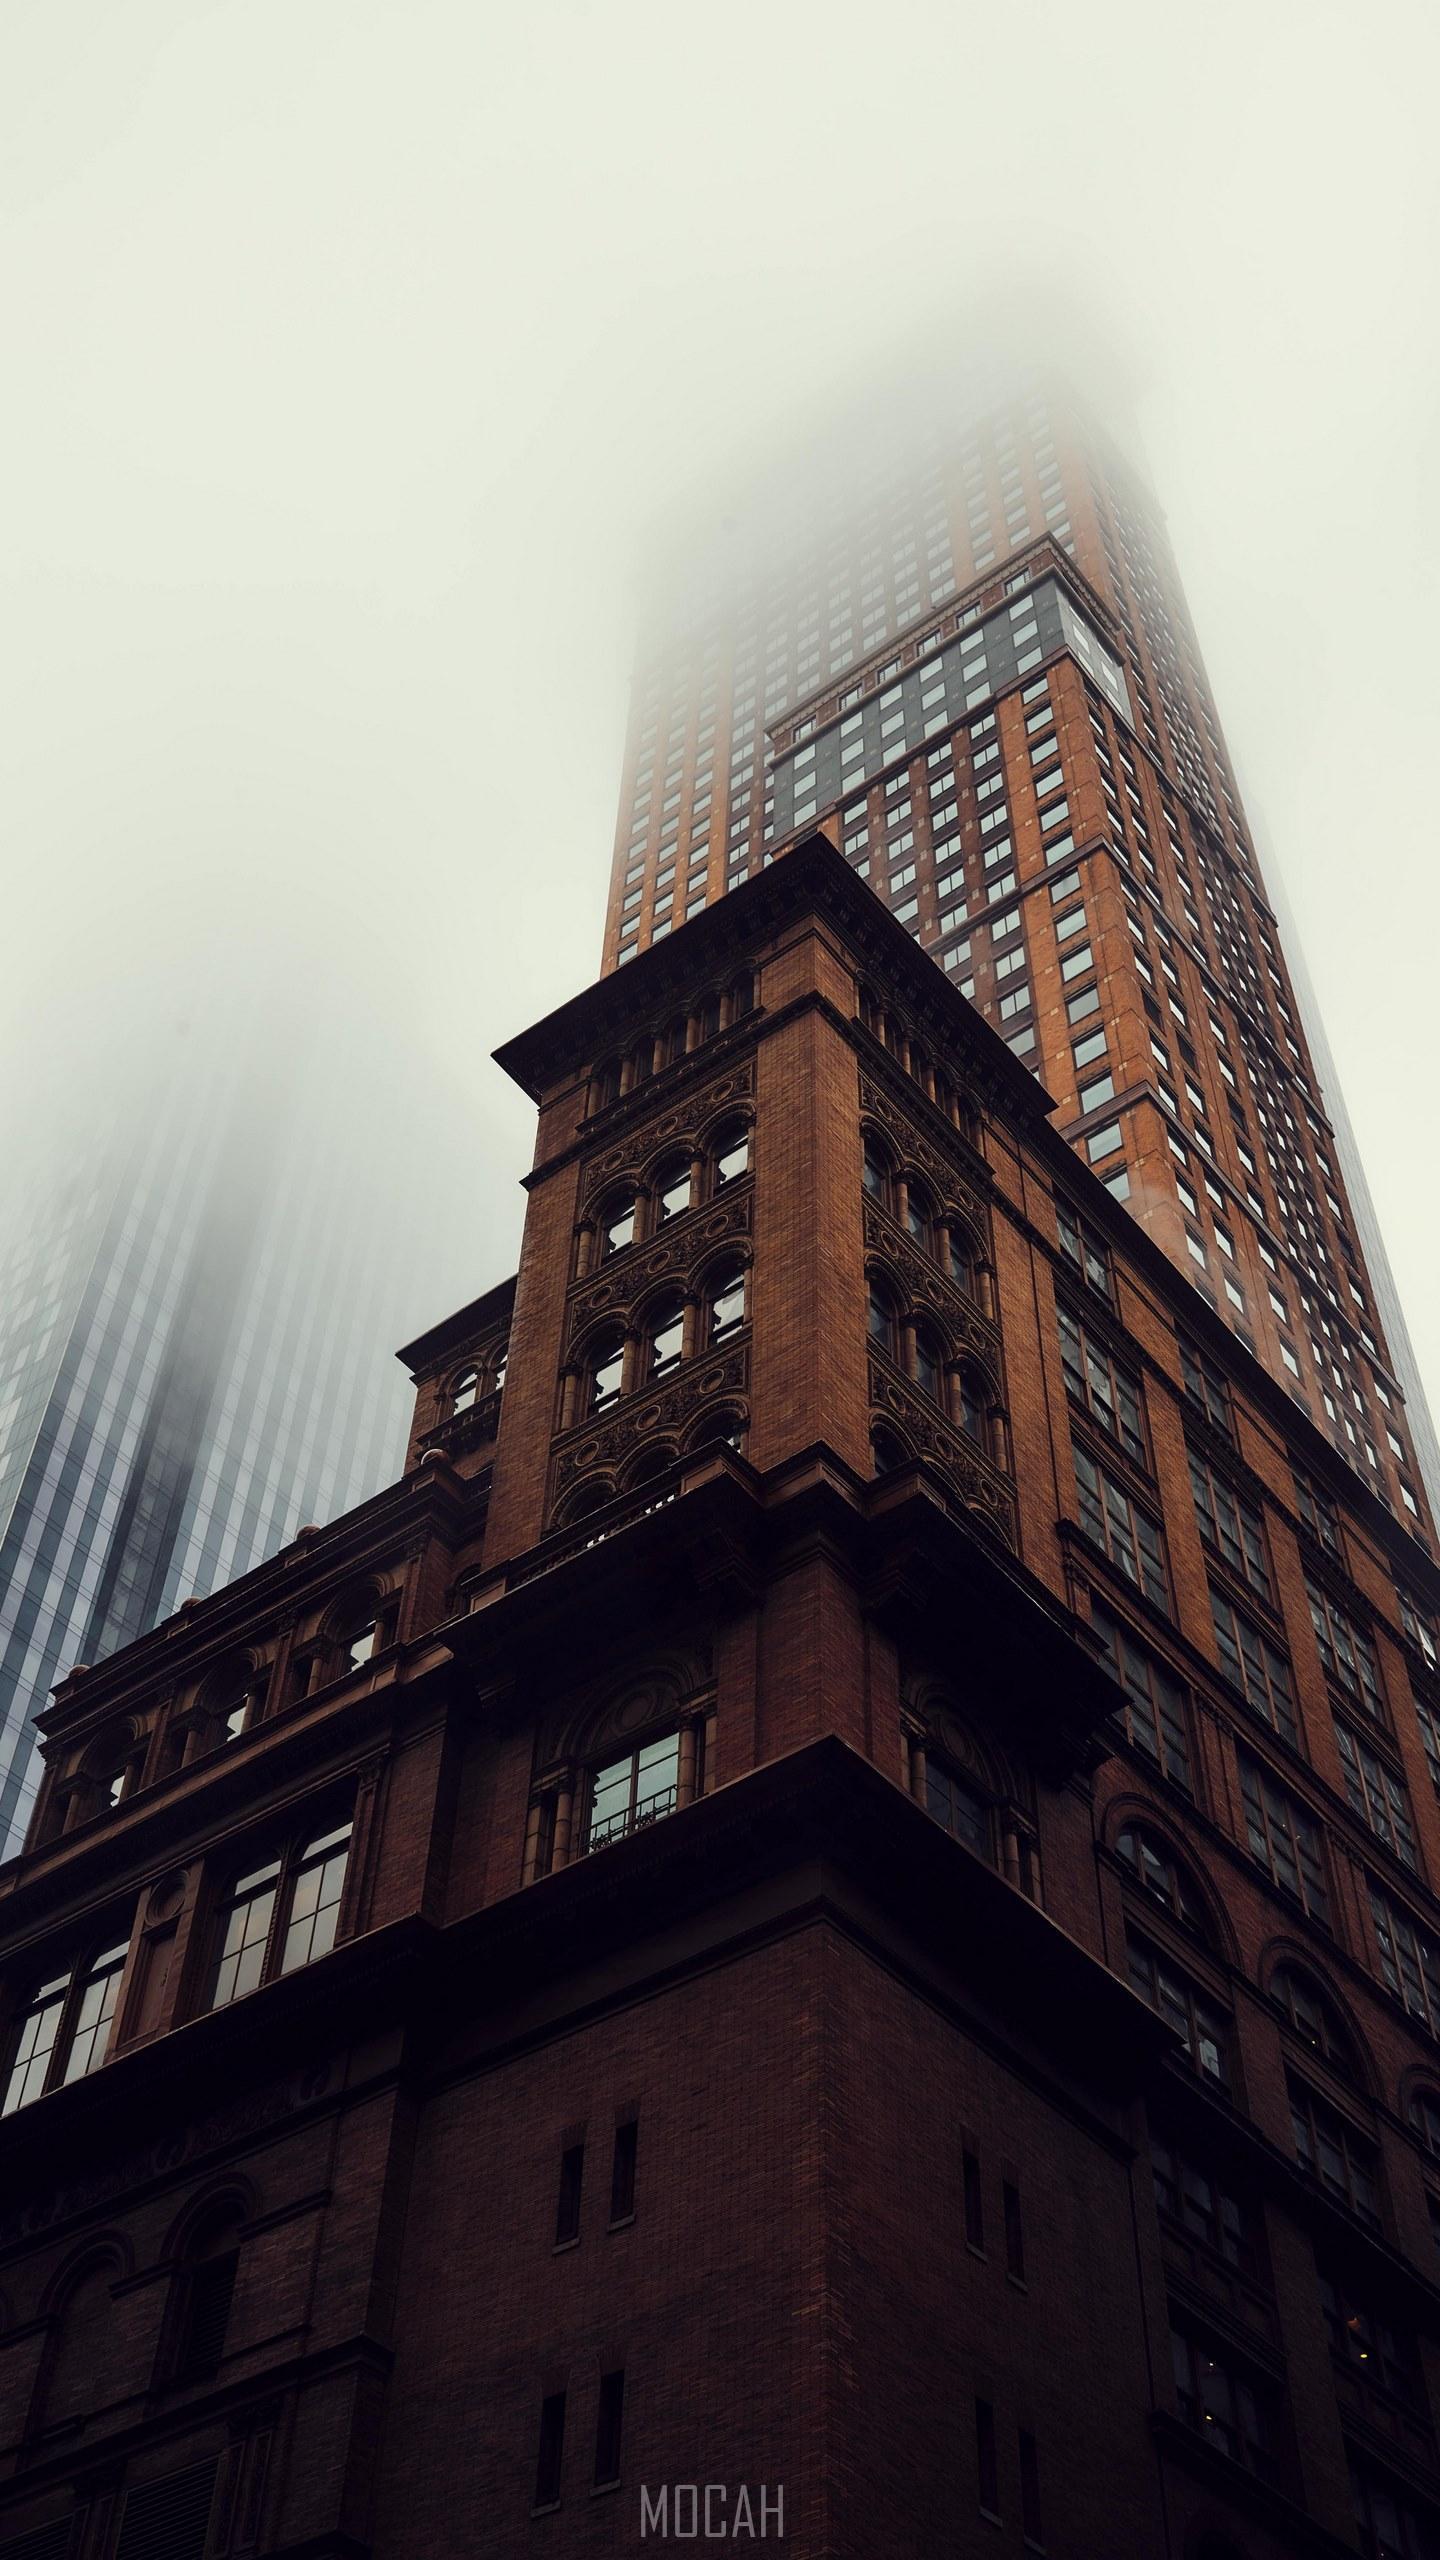 HD wallpaper, A Ground View Of A Dark Brick Skyscraper Disappearing Into Fog In New York City, 1440X2560, Lg G4 Wallpaper Hd Free Download, Giant In The Mist